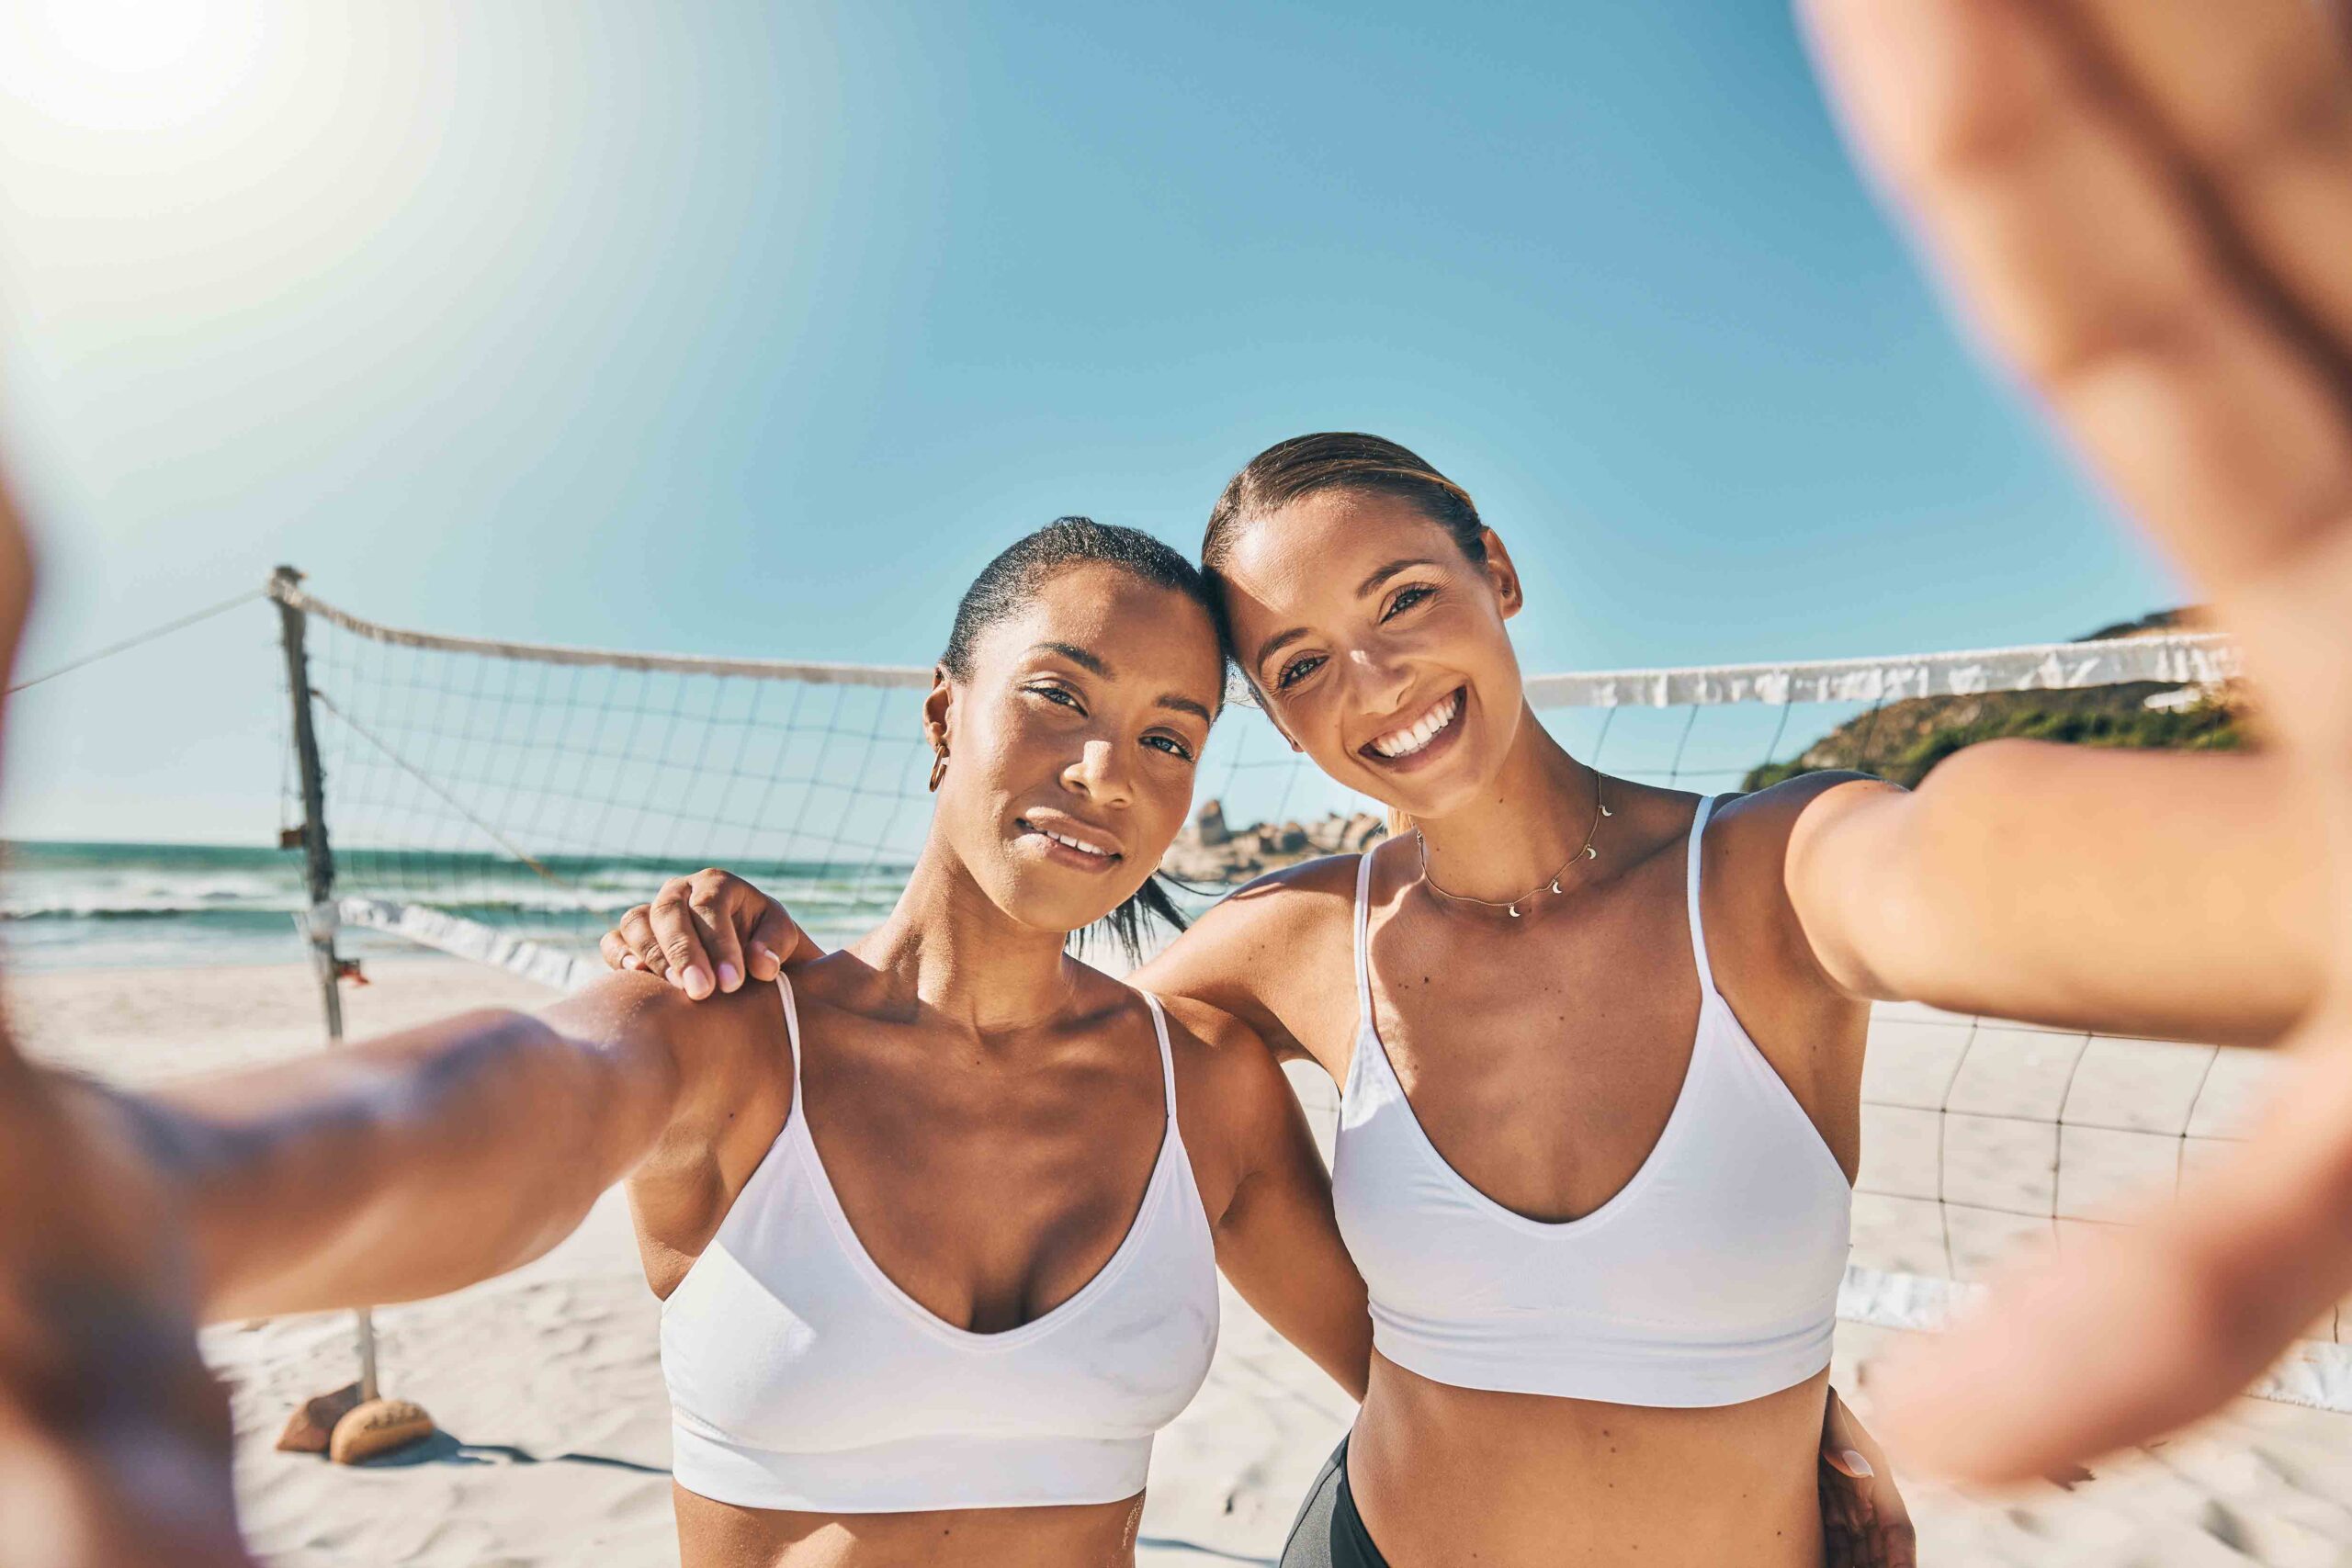 Volleyball women friends in selfie on beach and outdoor summer, fitness and wellness lifestyle. You.